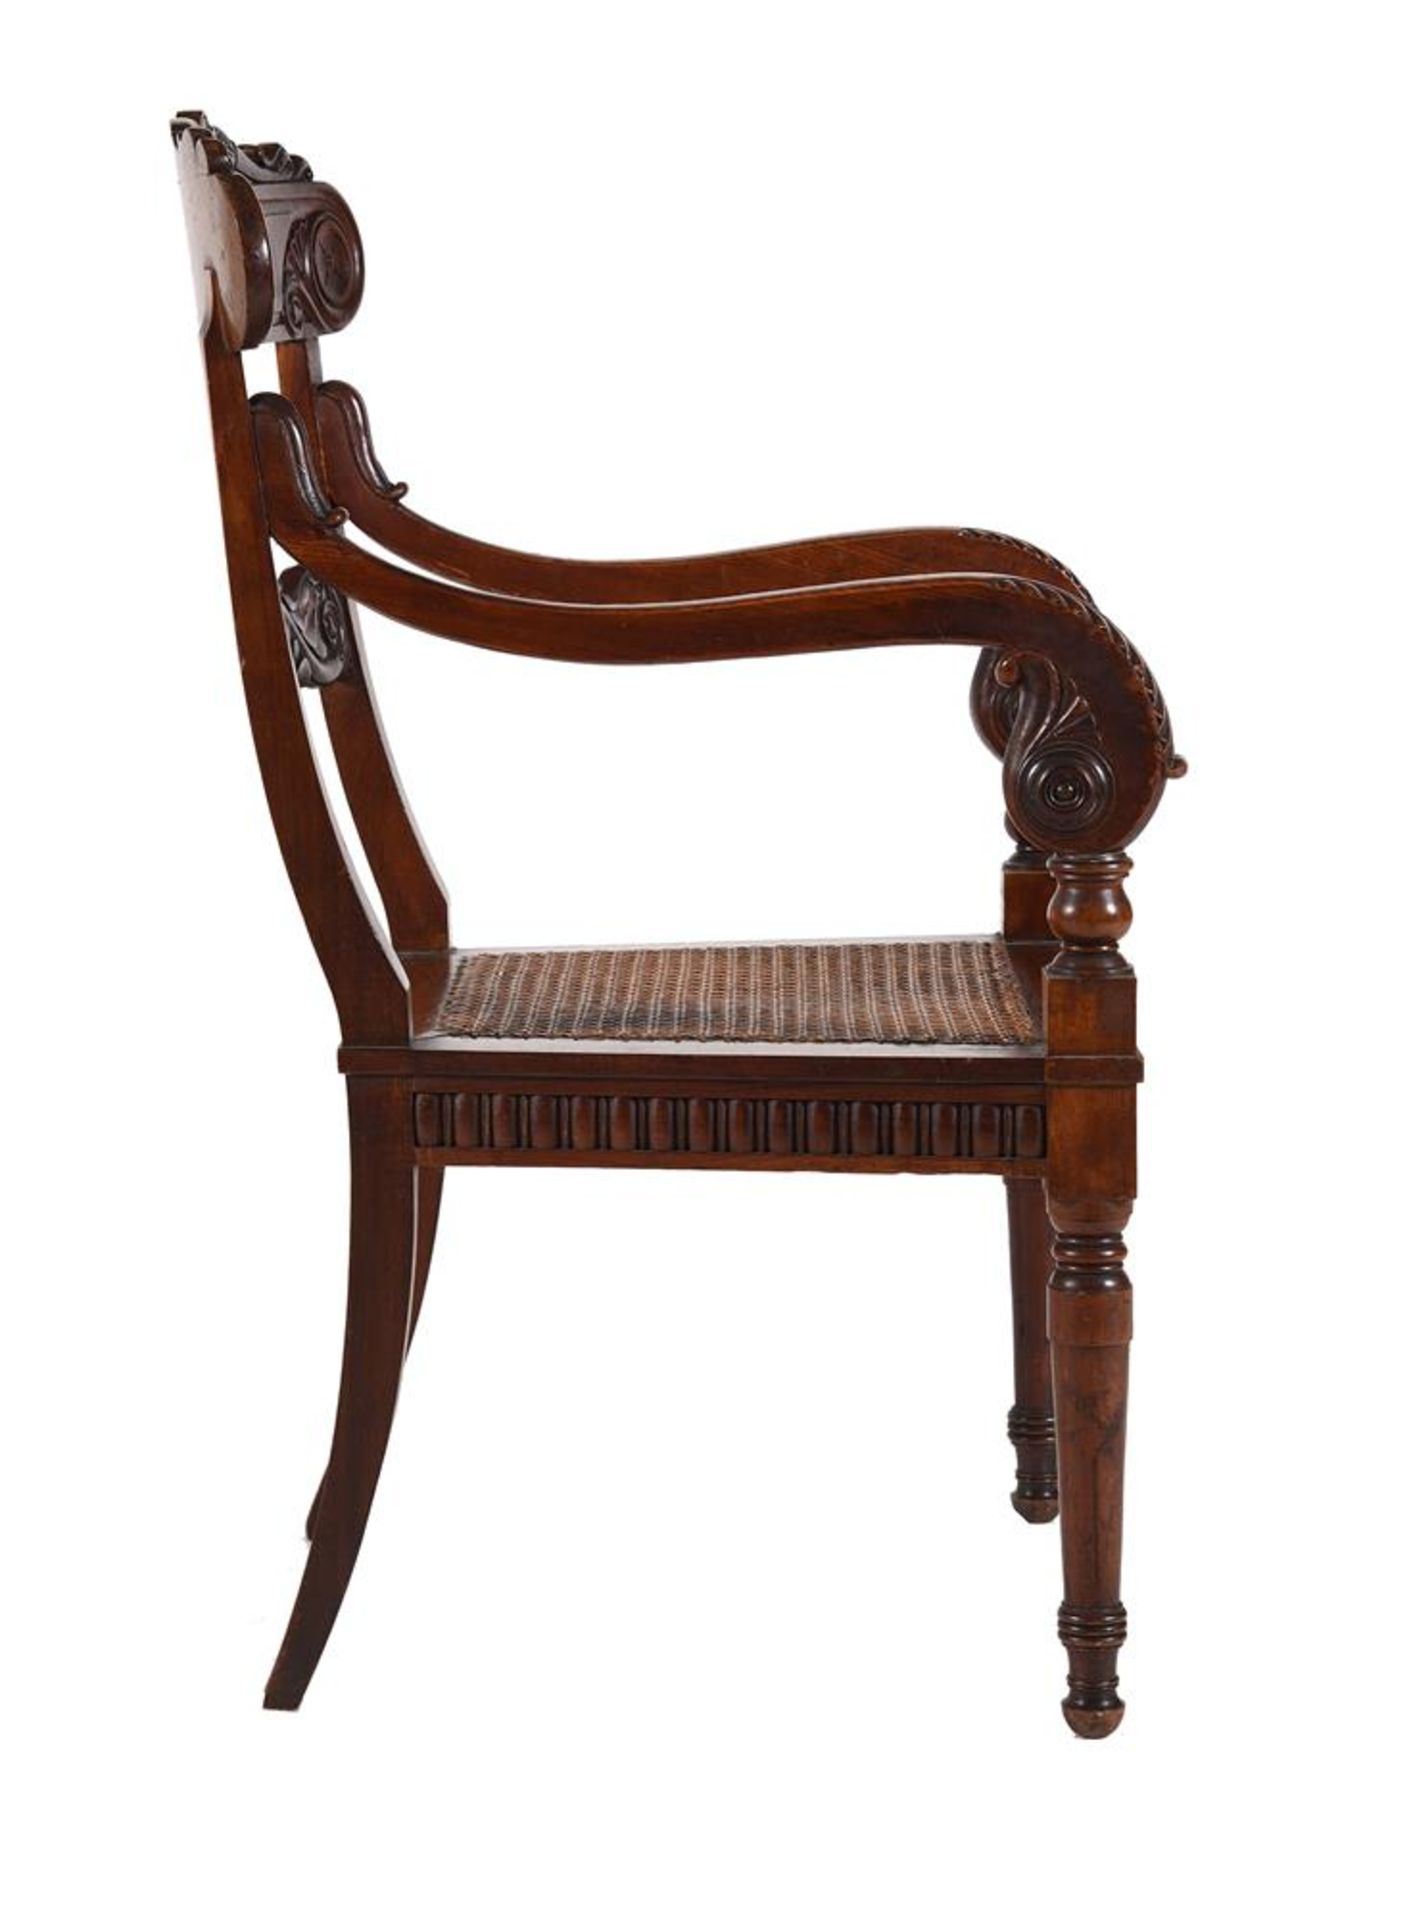 A SET OF FOUR WILLIAM IV MAHOGANY ARMCHAIRS, IN THE MANNER OF GILLOWS, CIRCA 1835 - Image 9 of 9